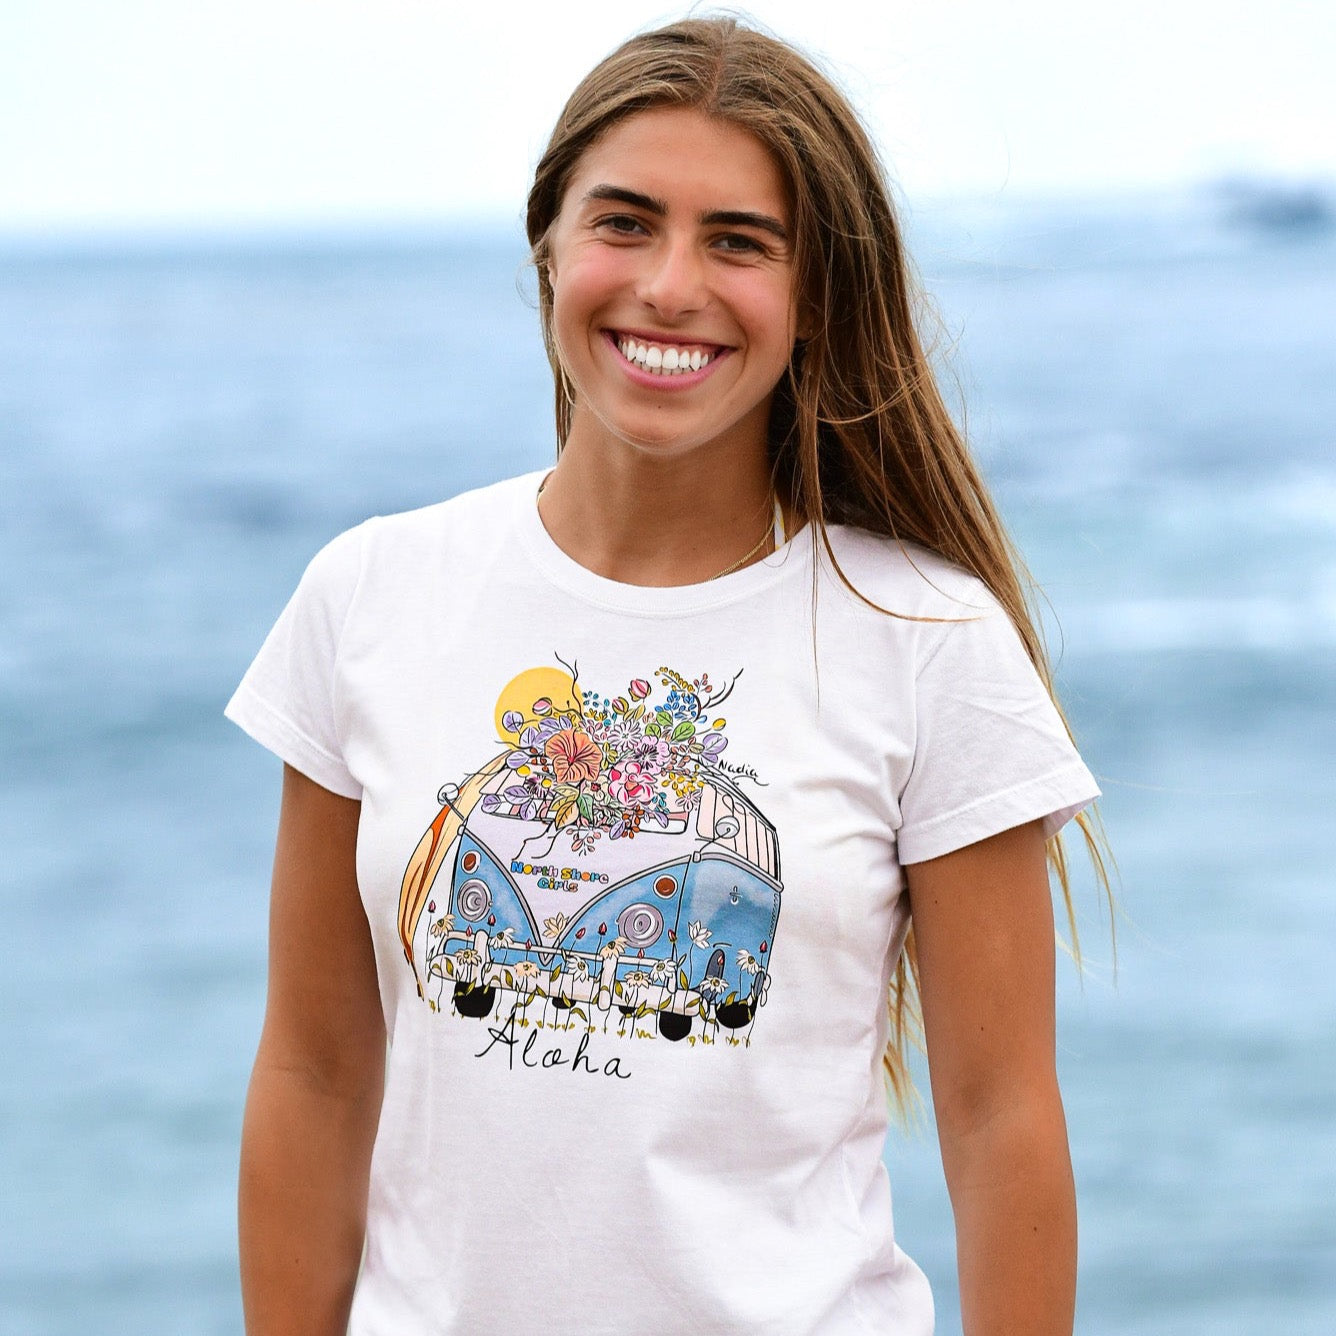 North Shore Girls Aloha Surf Bus floral illustrated graphic tee for women. Made by a local artist Nadia Watts